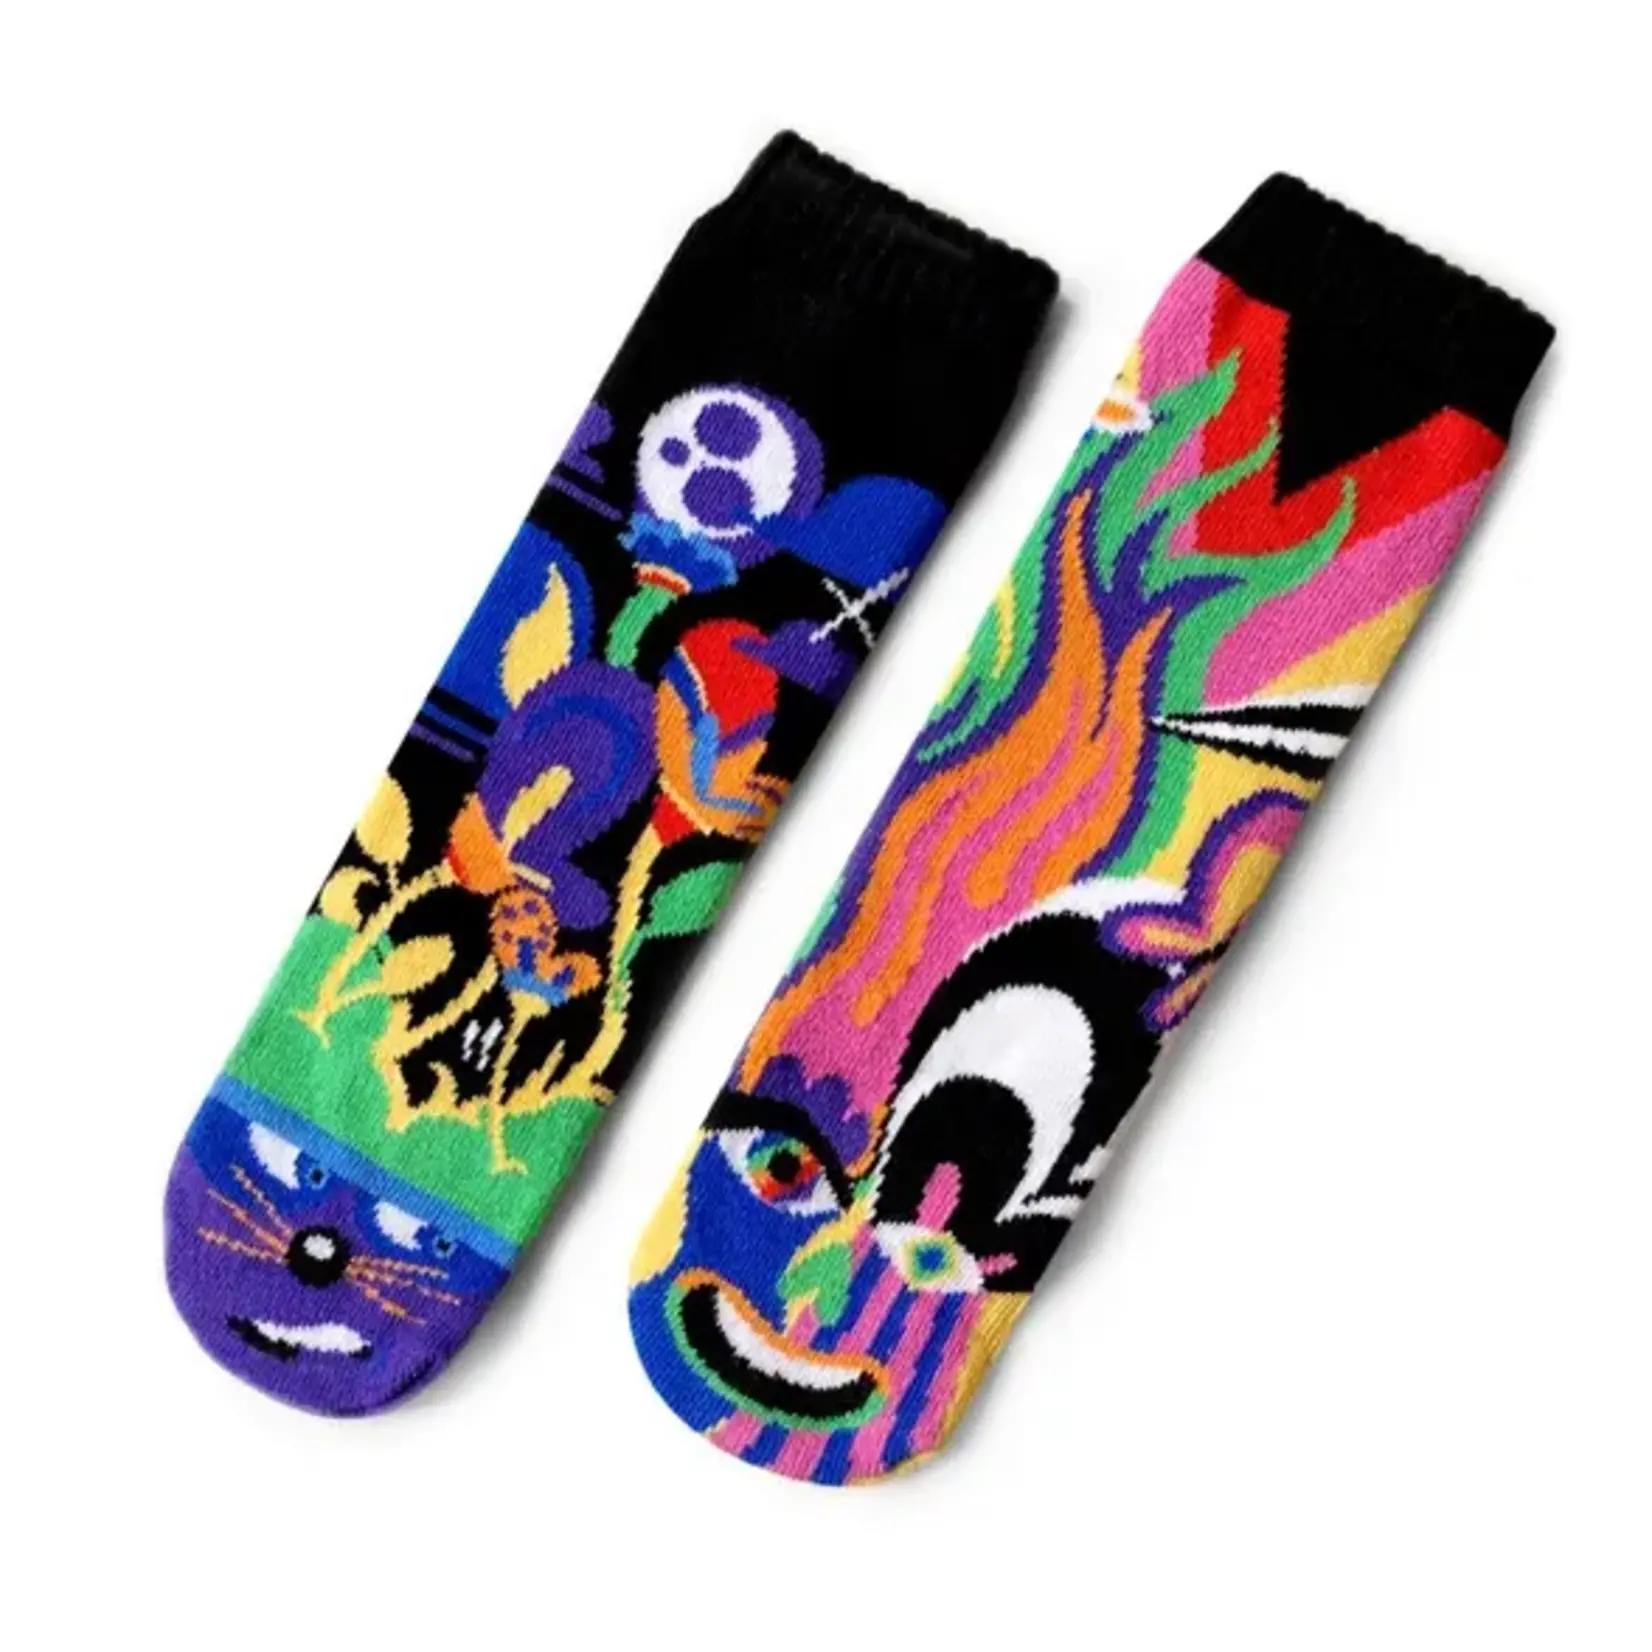 Pals Socks - Shy & Outgoing, Adult 13+